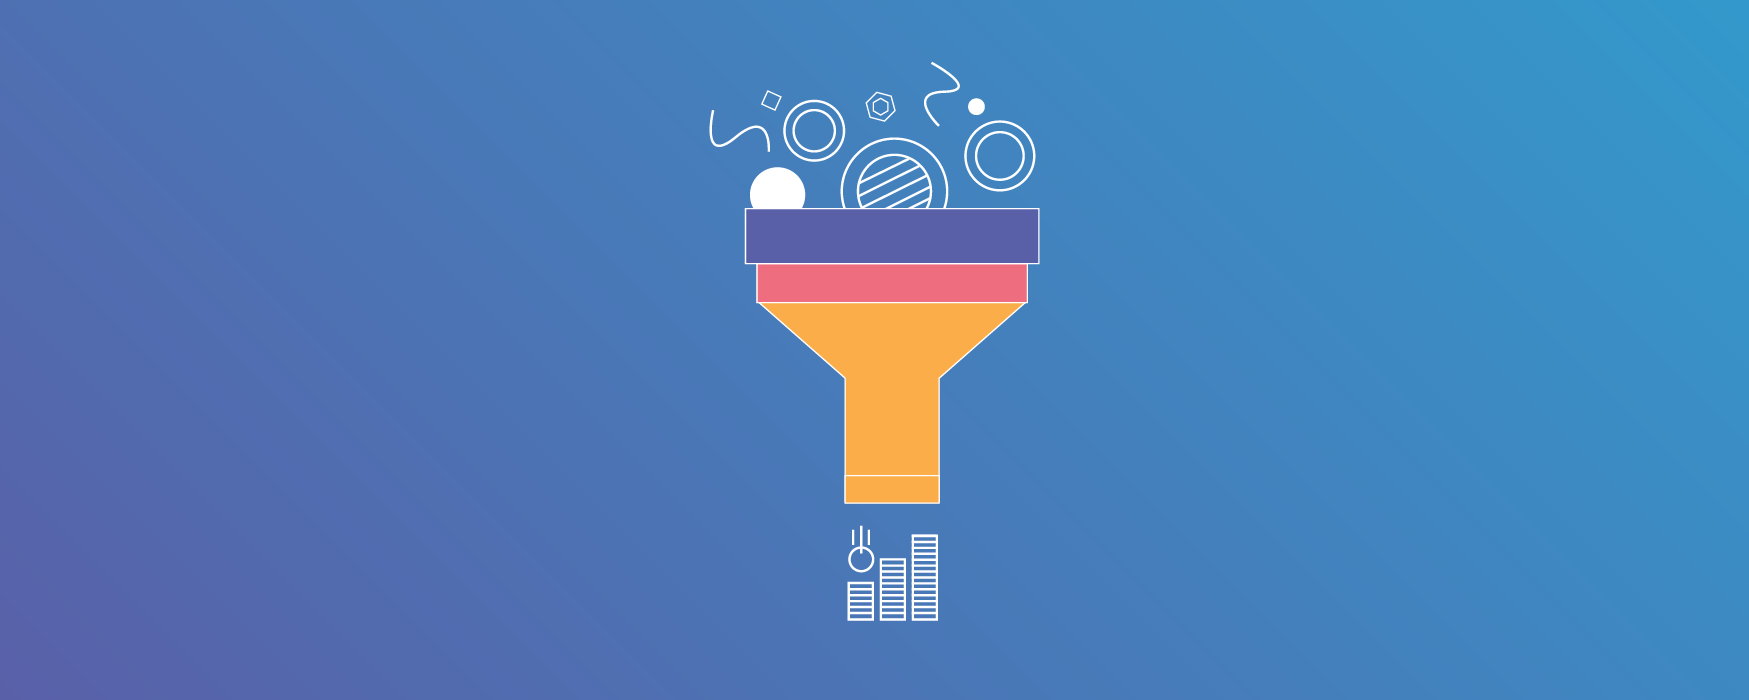 How to Optimize Your Marketing Funnel with Events